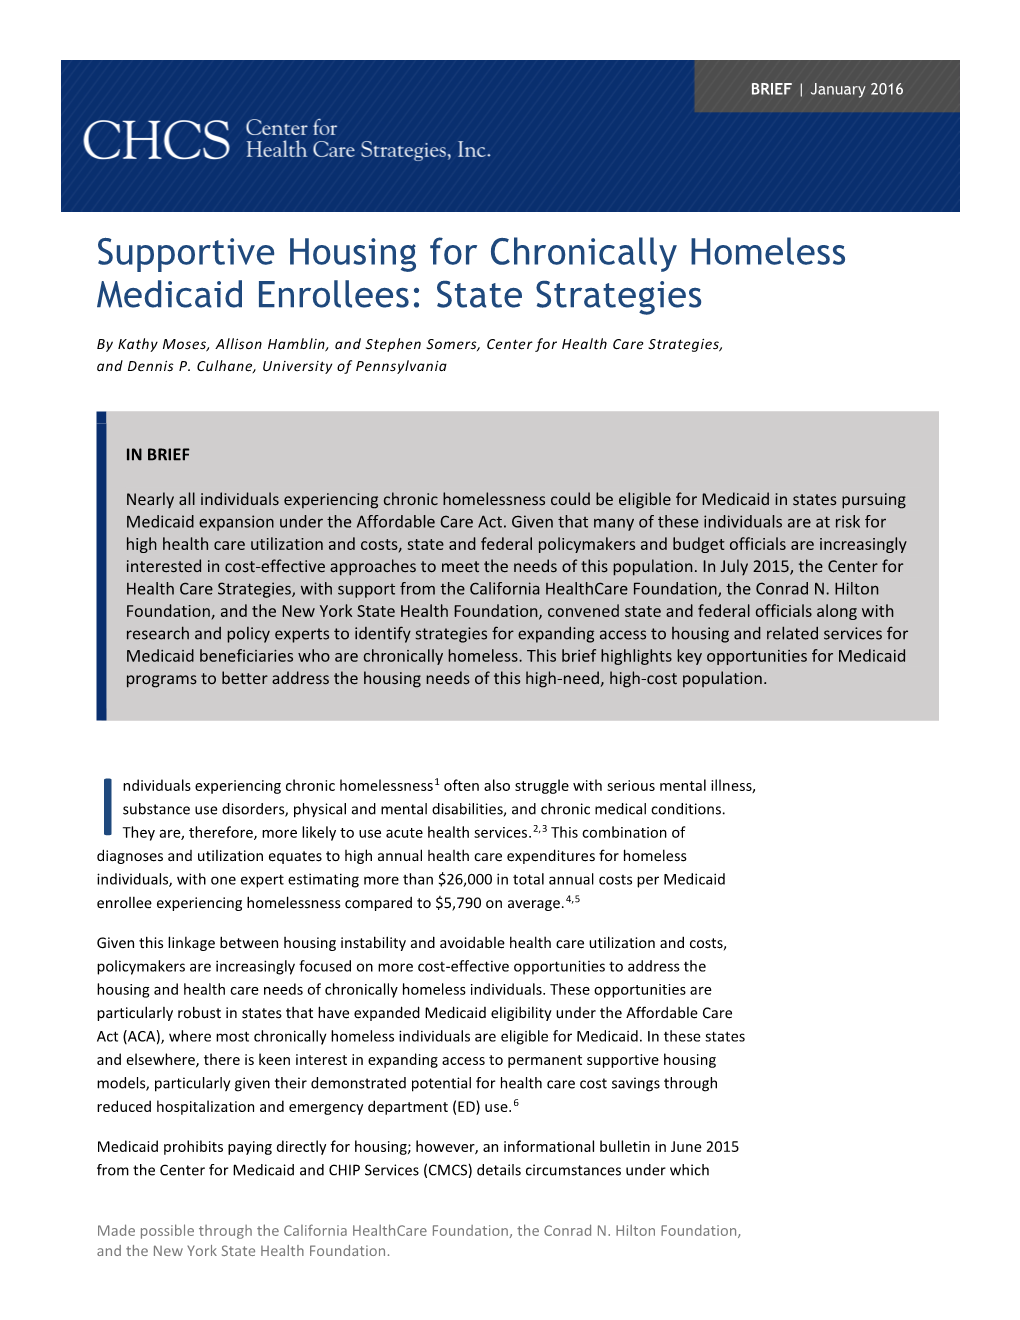 Supportive Housing for Chronically Homeless Medicaid Enrollees: State Strategies